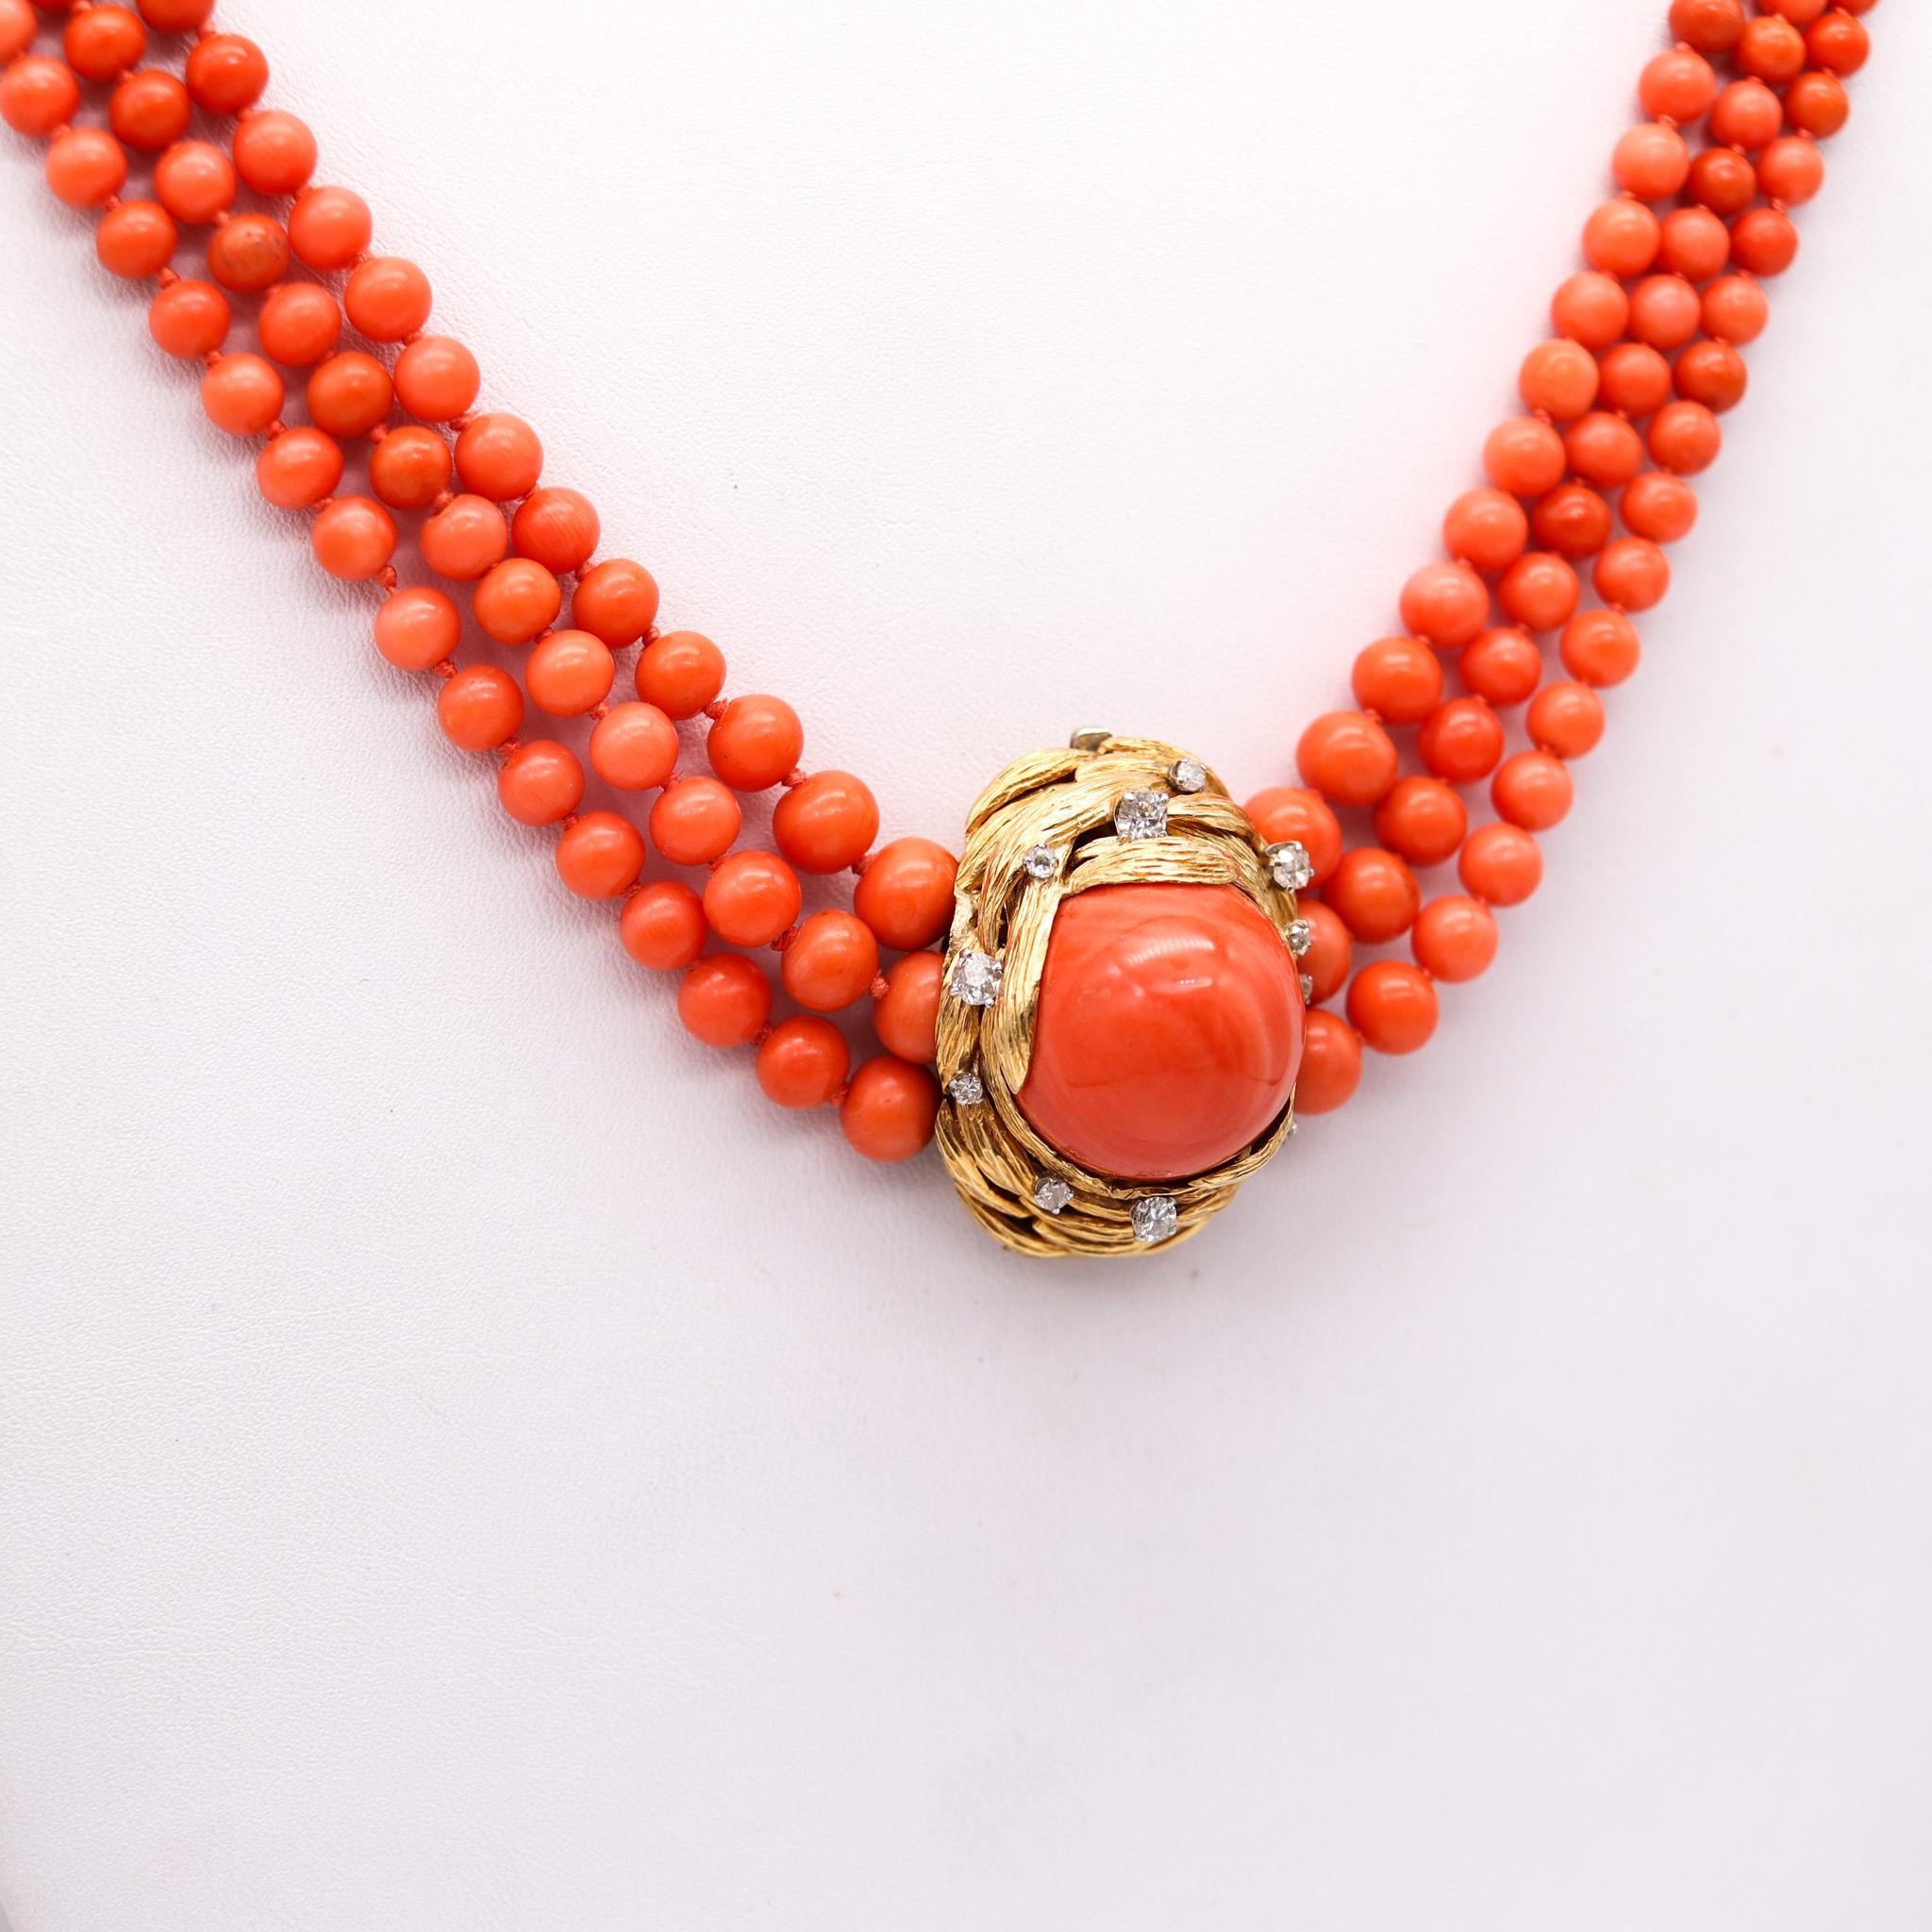 Graduated coral necklace designed by David Webb (1925-1975).

Very nice necklace with three layers of graduated corals, created in New York city at the jewelry atelier of David Webb, back in the late 1960. This statement necklace was carefully